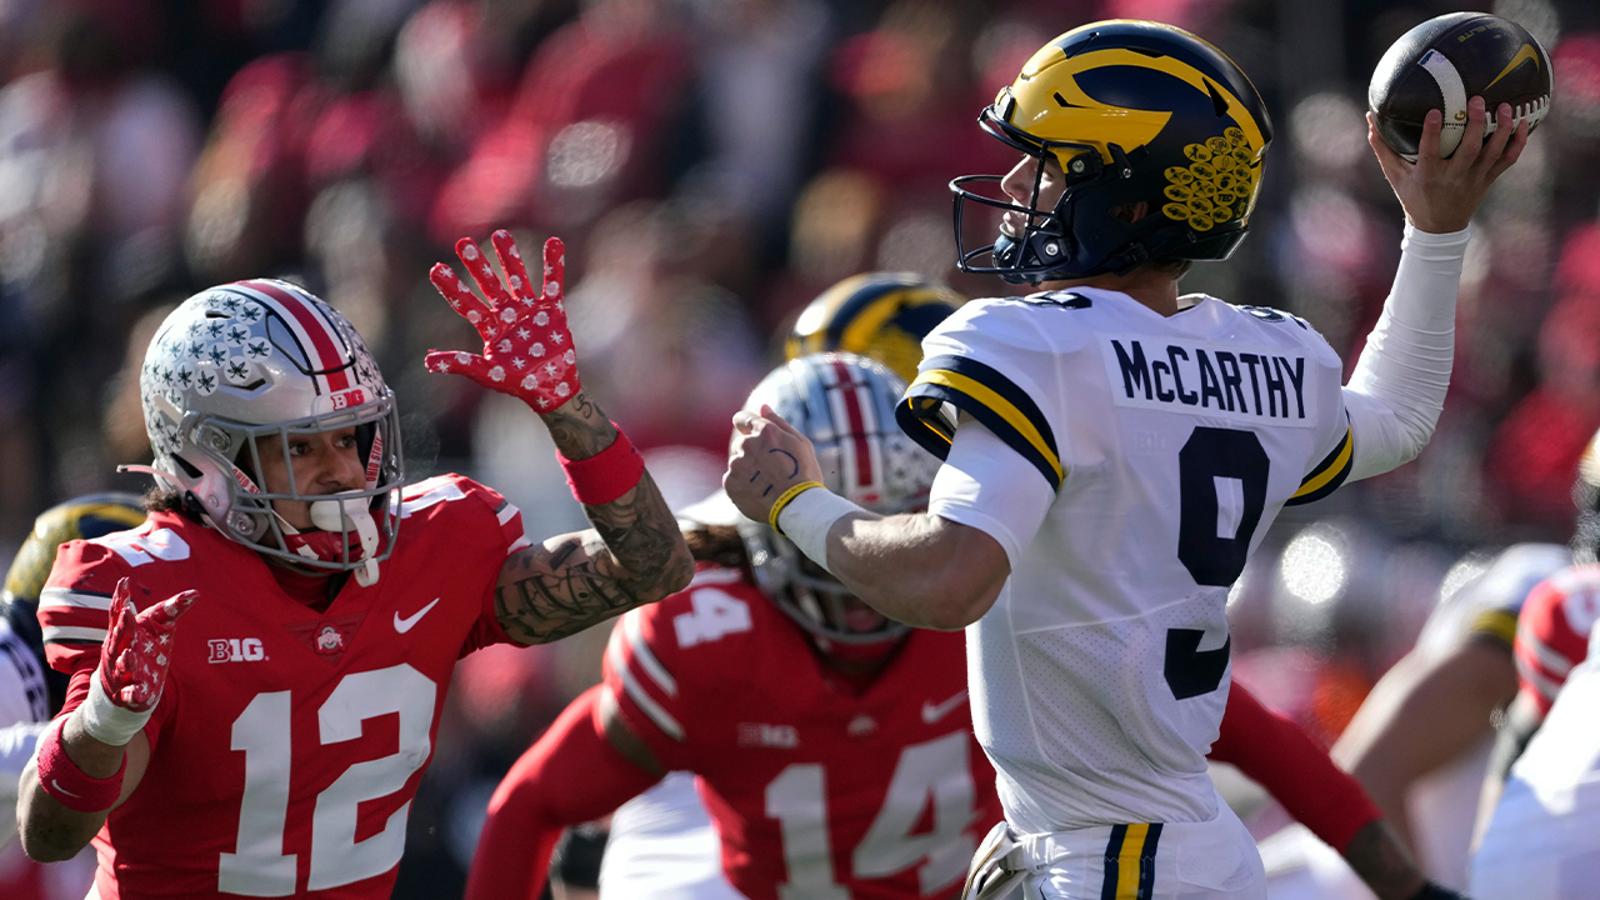 Beryl TV play-60d88388f001519--MichTN_1669498246600 Ryan Day, Ohio State will face scrutiny as Michigan stakes claim Sports 